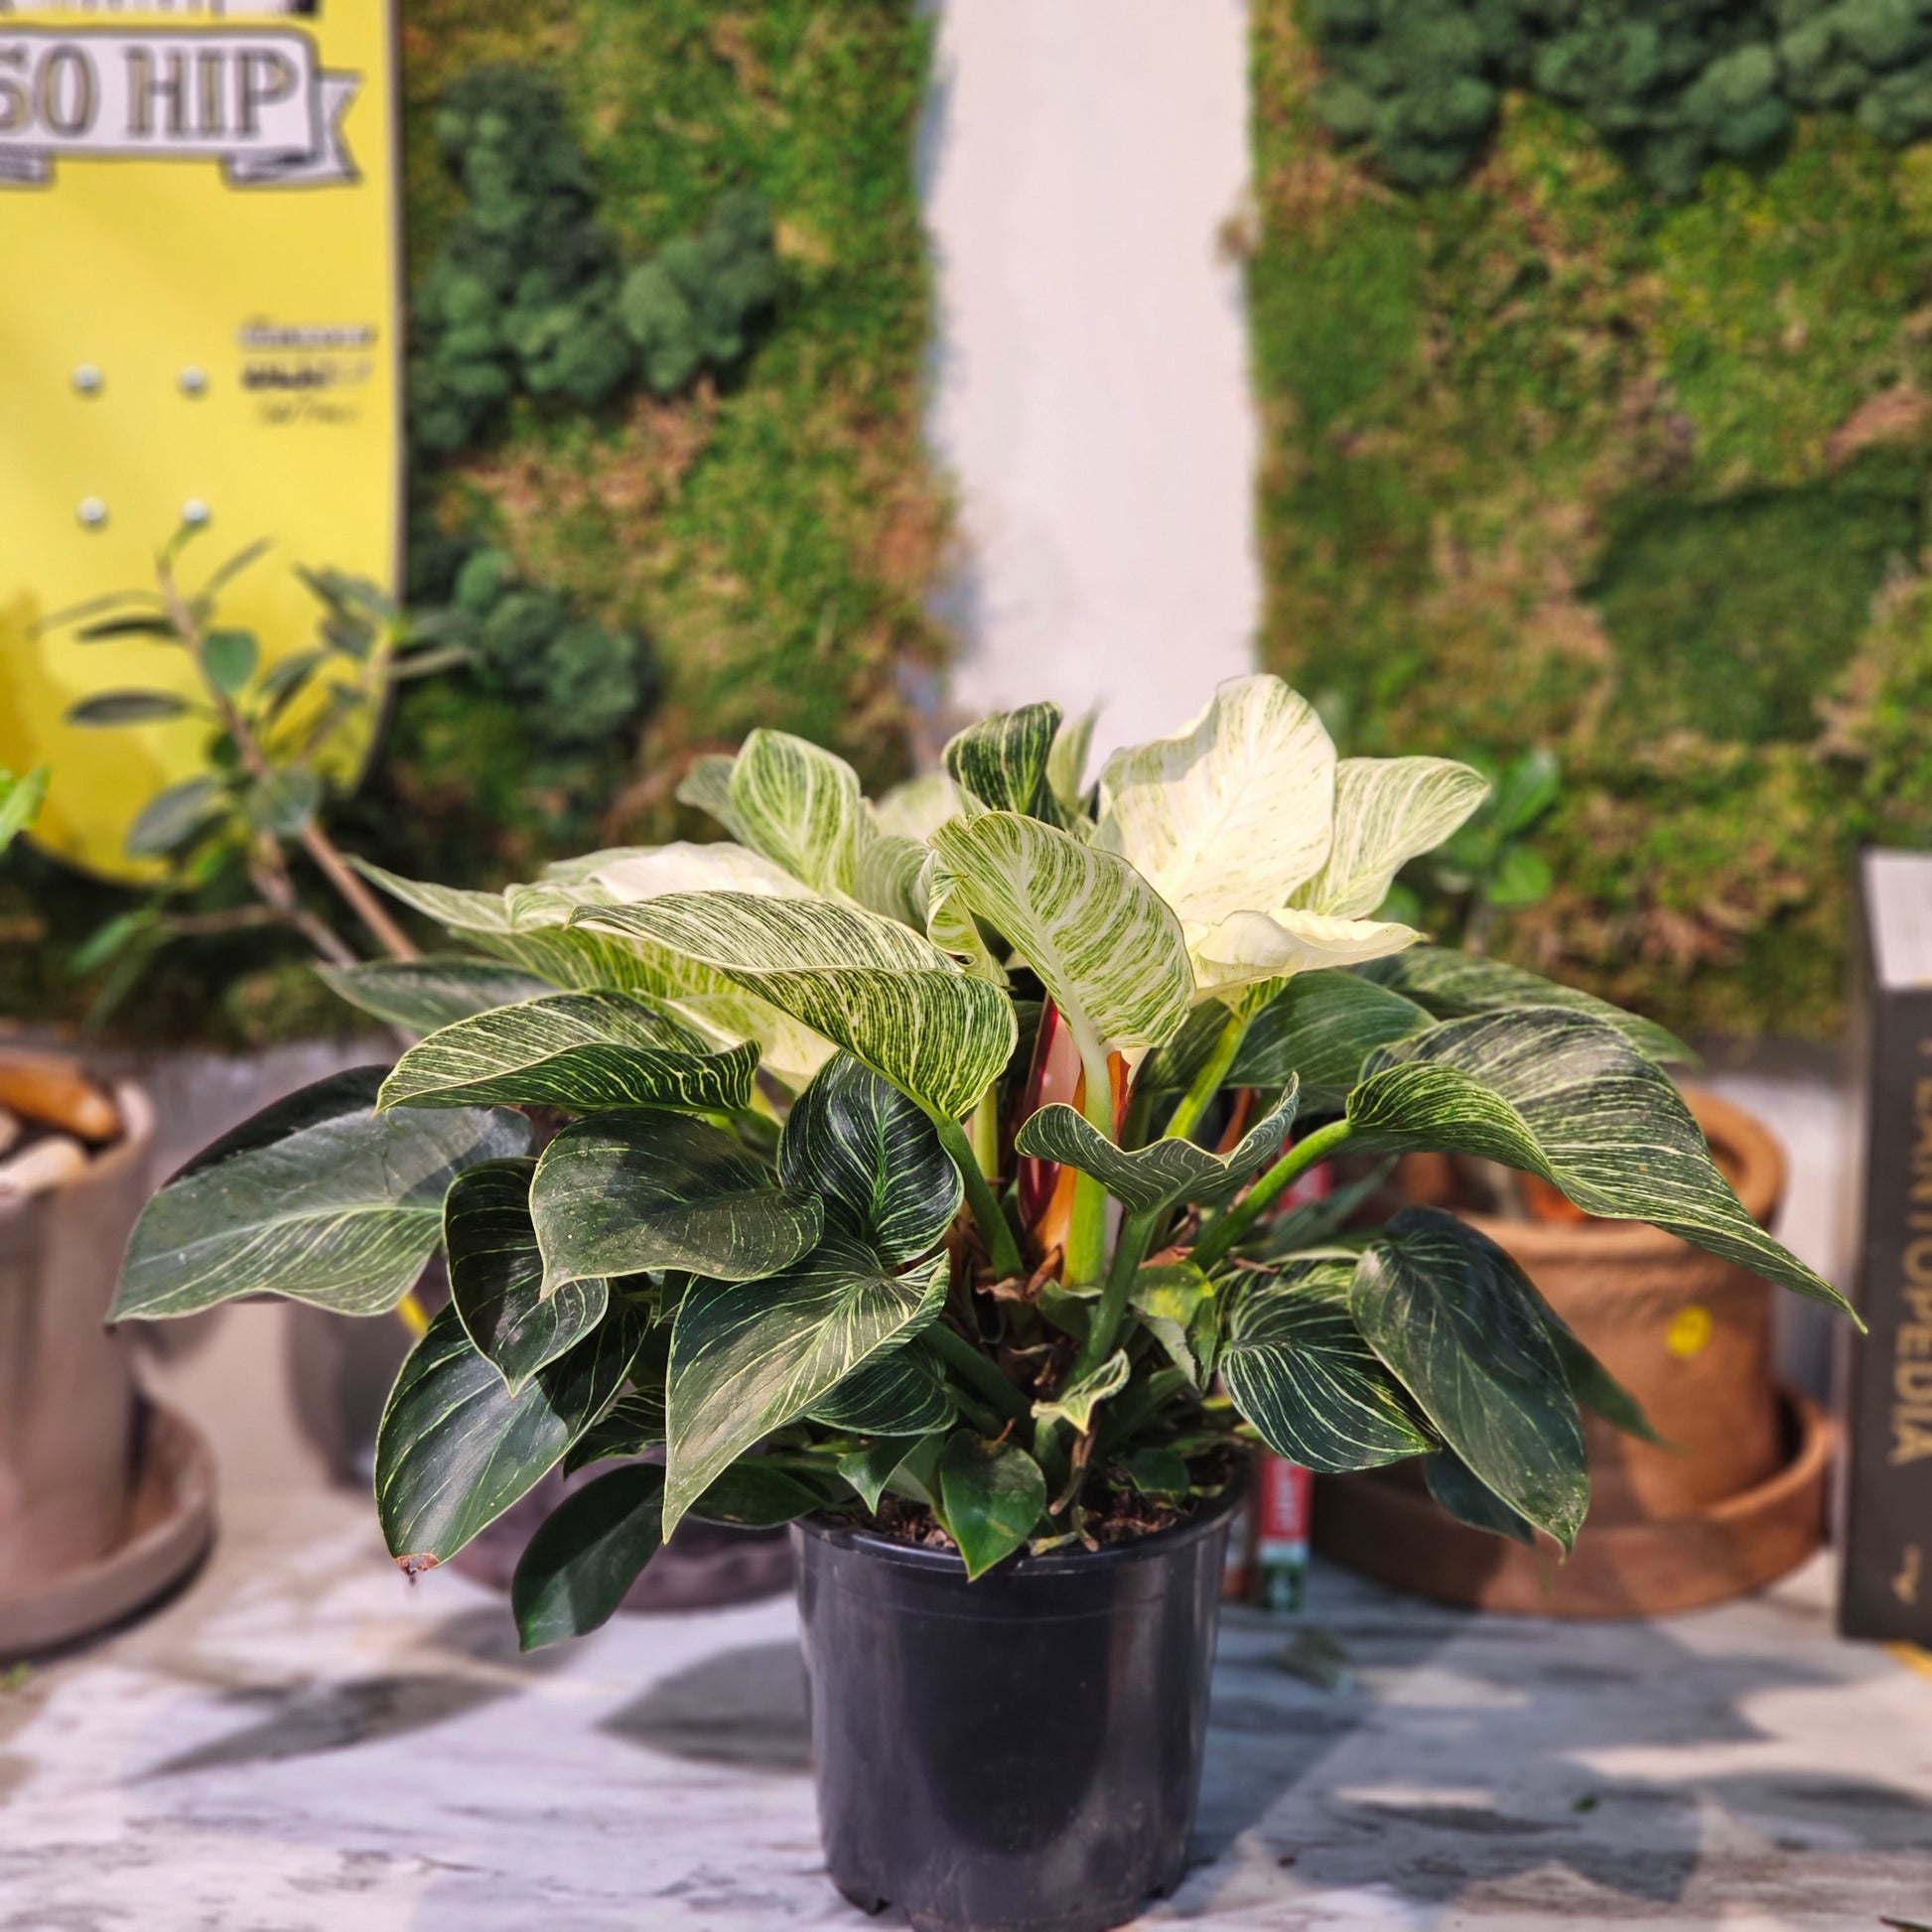 Birkin Philo (Philodendron) in a 6 inch pot. Indoor plant for sale by Promise Supply for delivery and pickup in Toronto